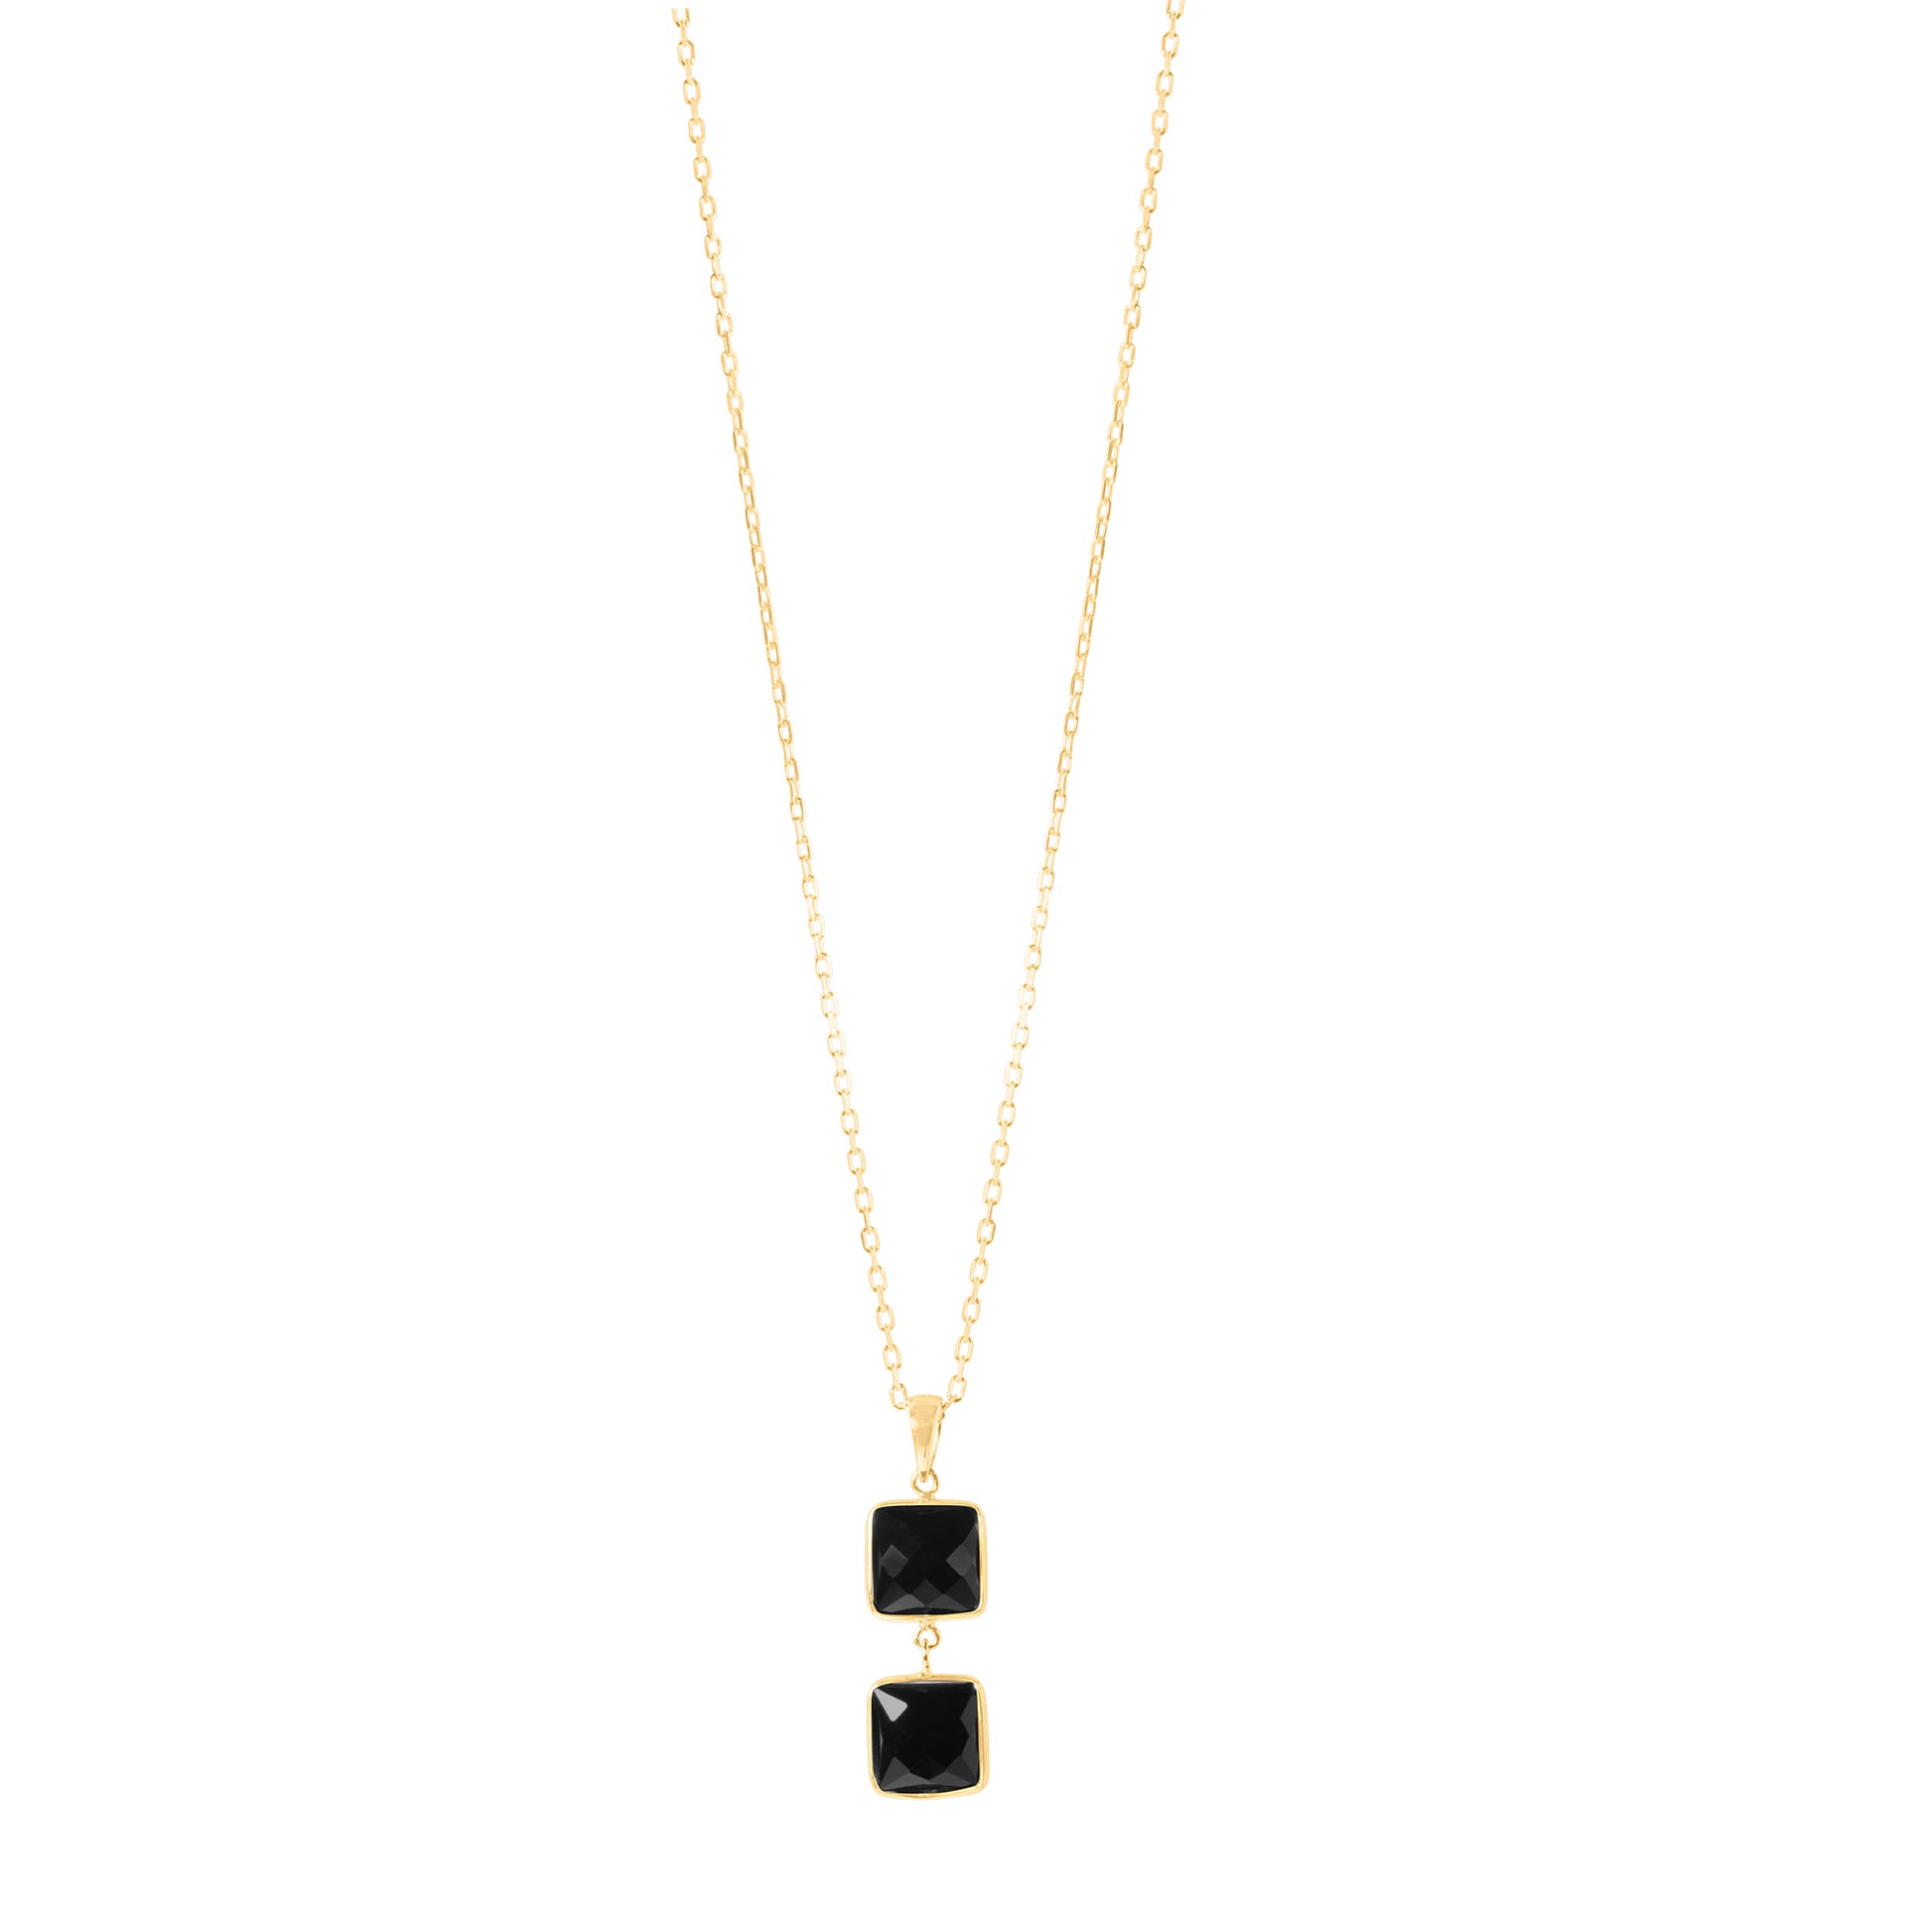 14k Black Onyx Faceted Square 2 Link Pendand Necklace 17"